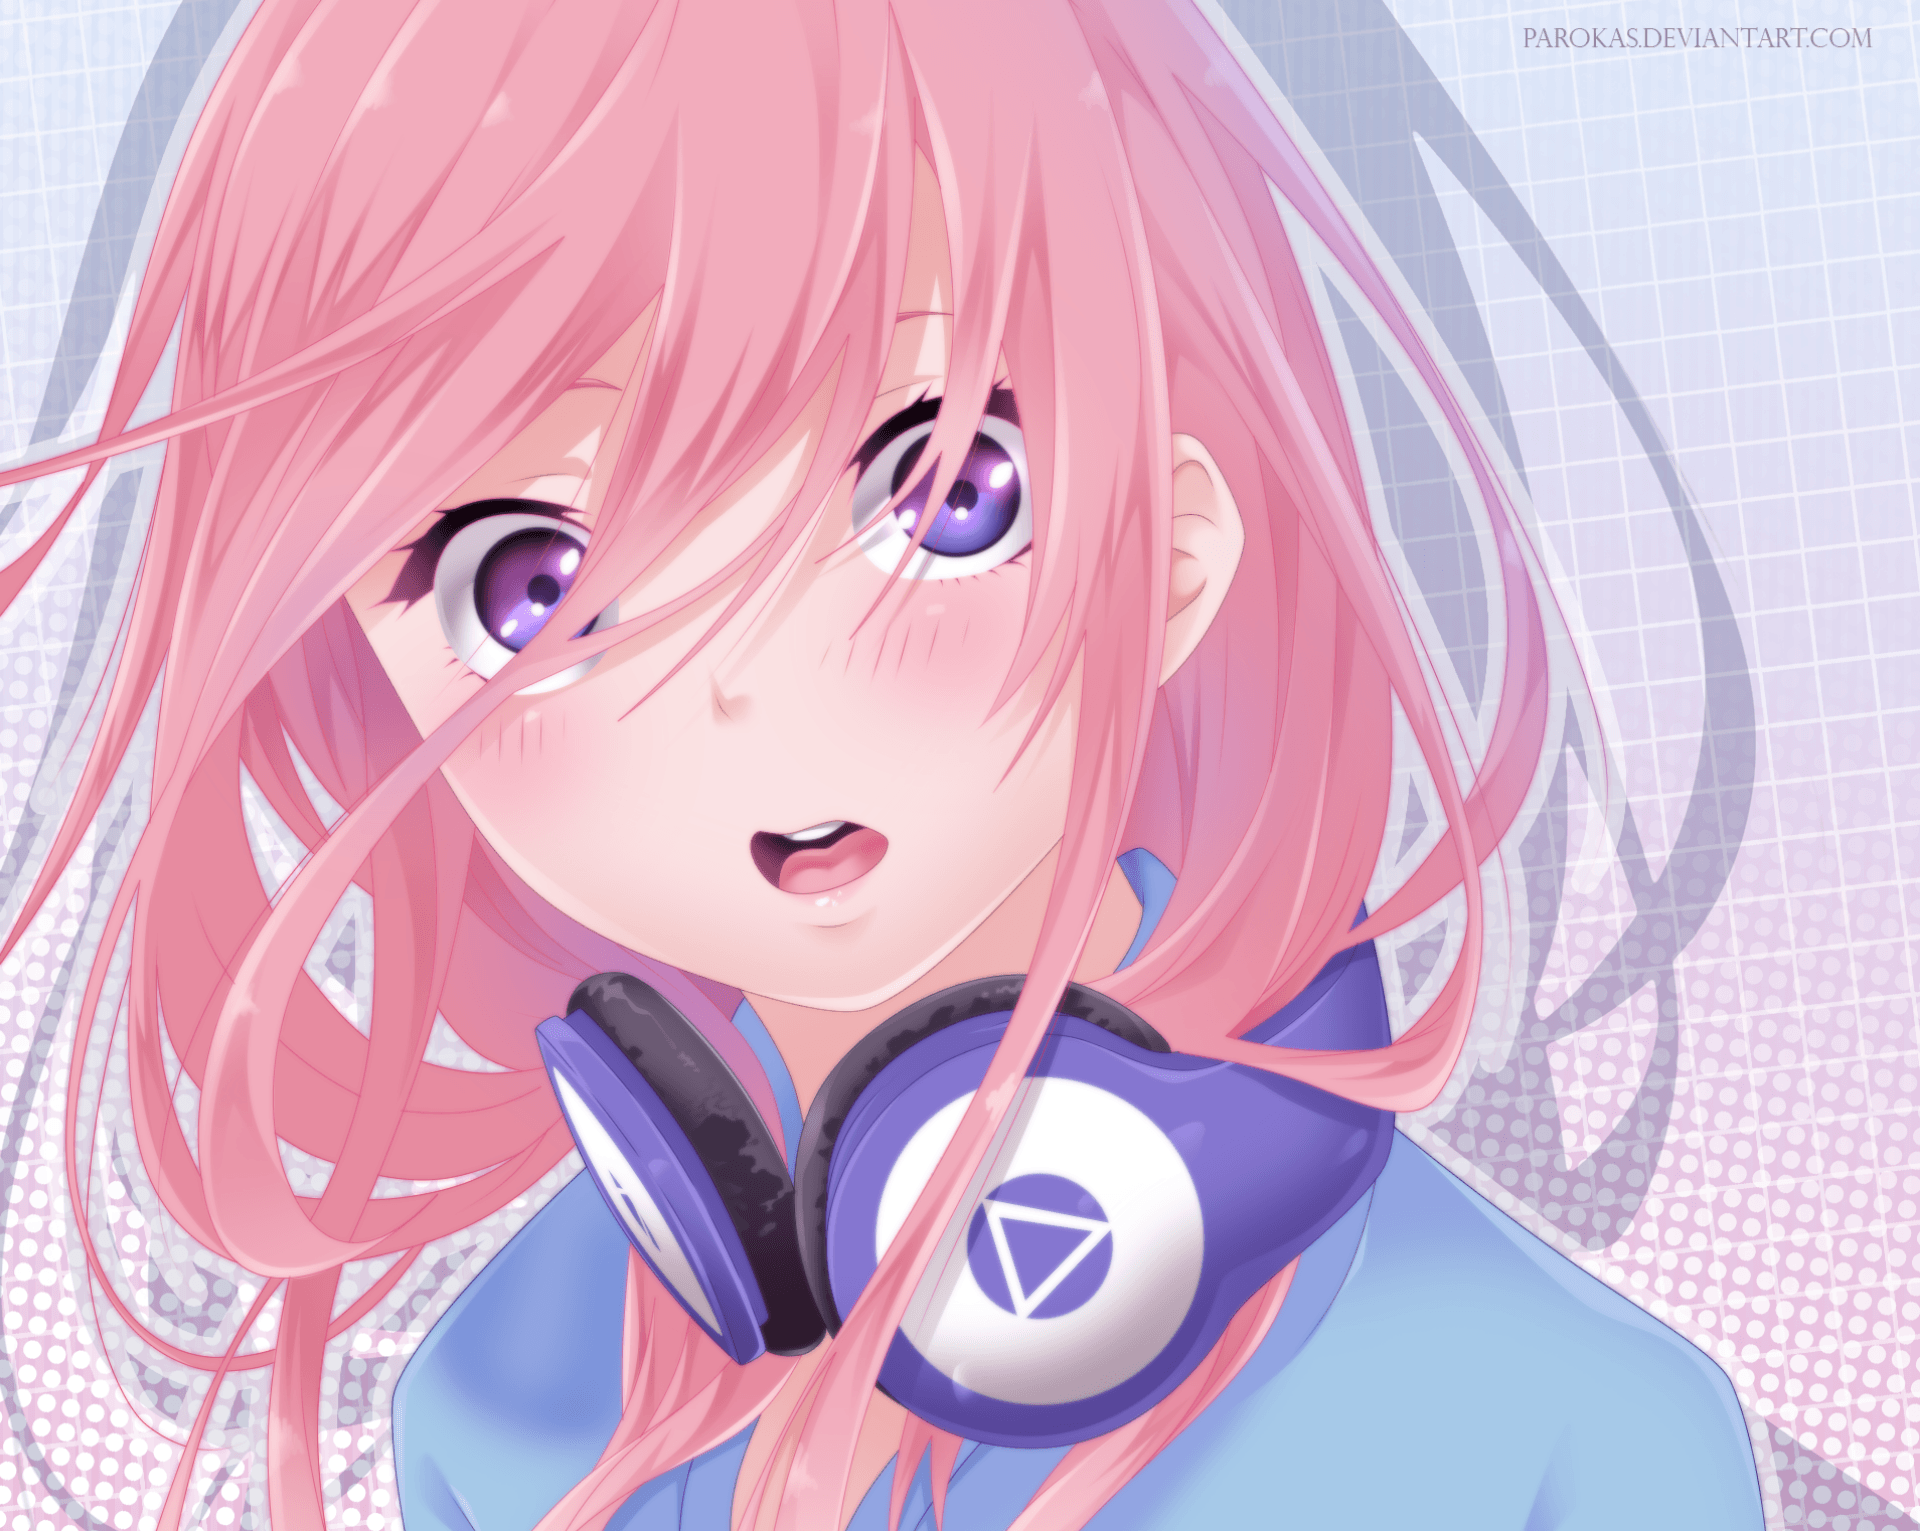 A girl with pink hair and headphones HD Wallpapers